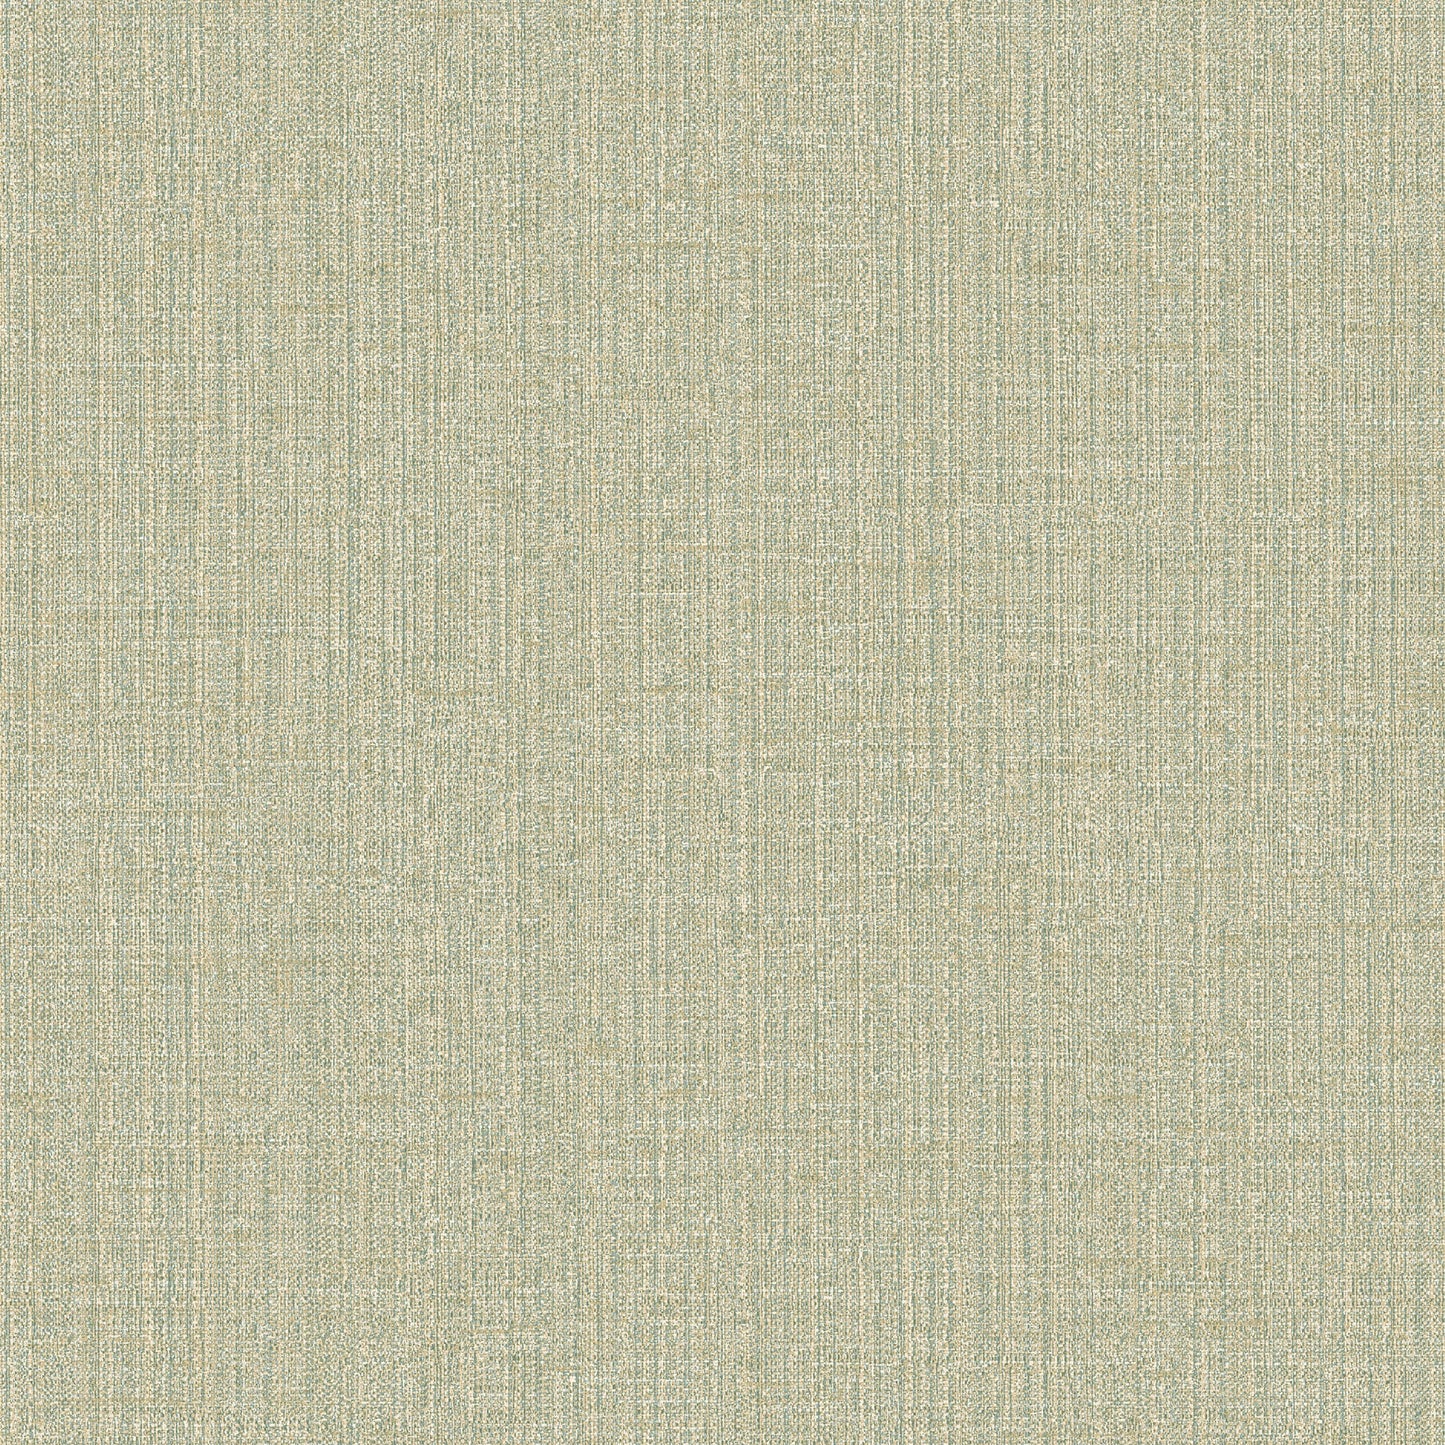 Buy 2767-003370 Beiene Light Green Weave Techniques & Finishes III Brewster